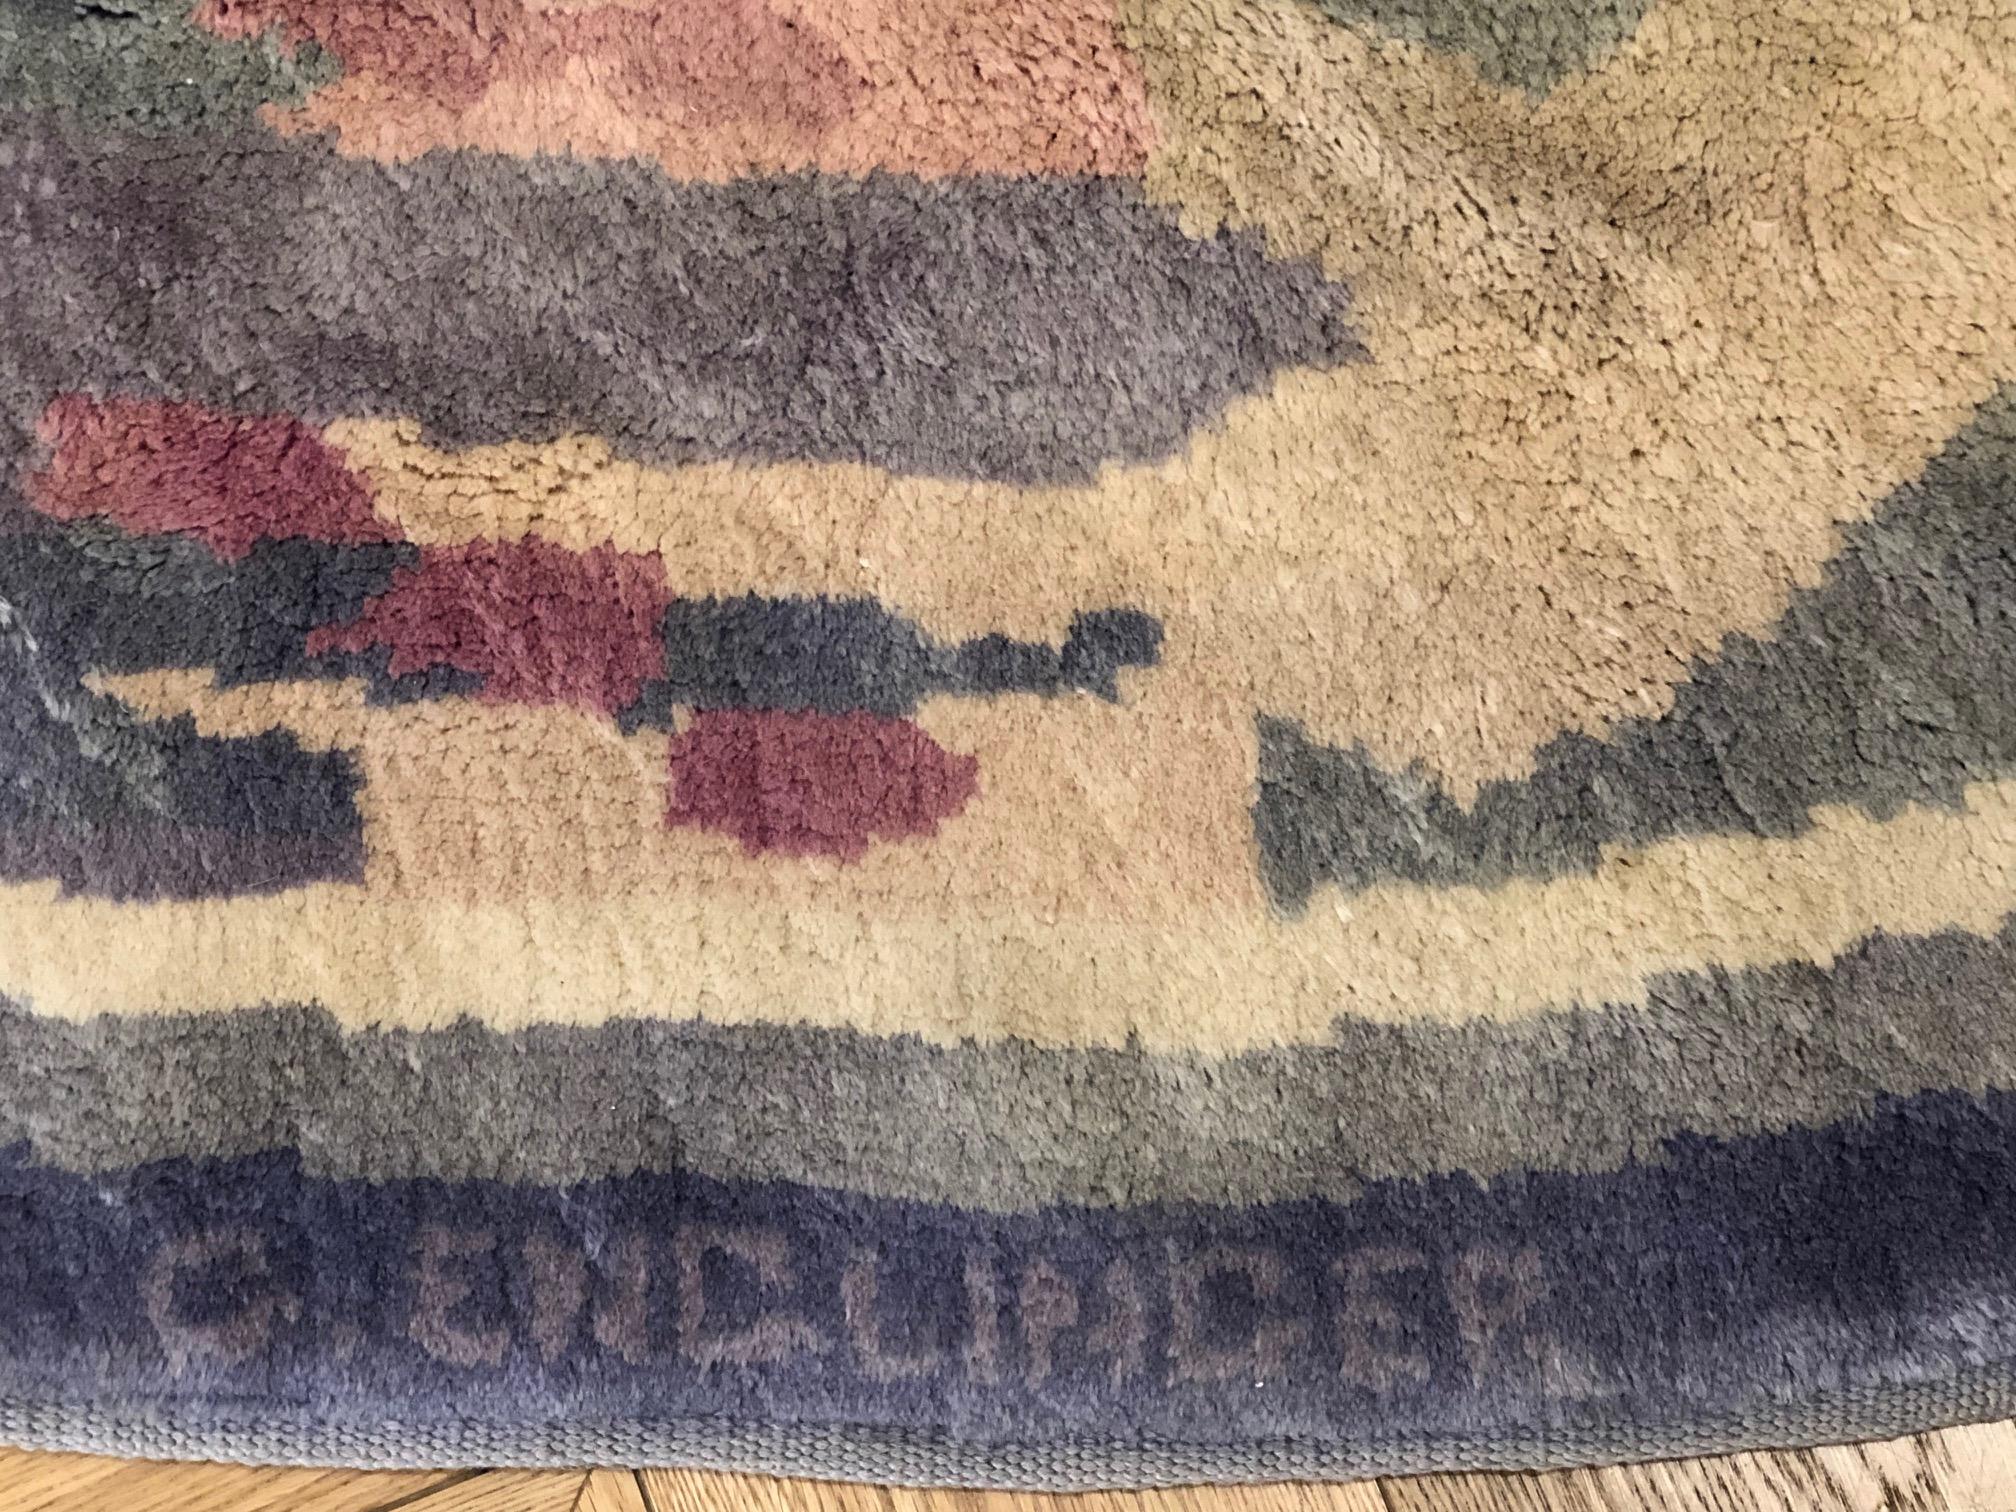 Savonerie carpet made by designer Gabriel Englinger (1898–1983) representative of the model of aesthetic taste that spread in Europe and the United States between the “roaring Twenties” and the thirties of the 20th century. The Déco style,